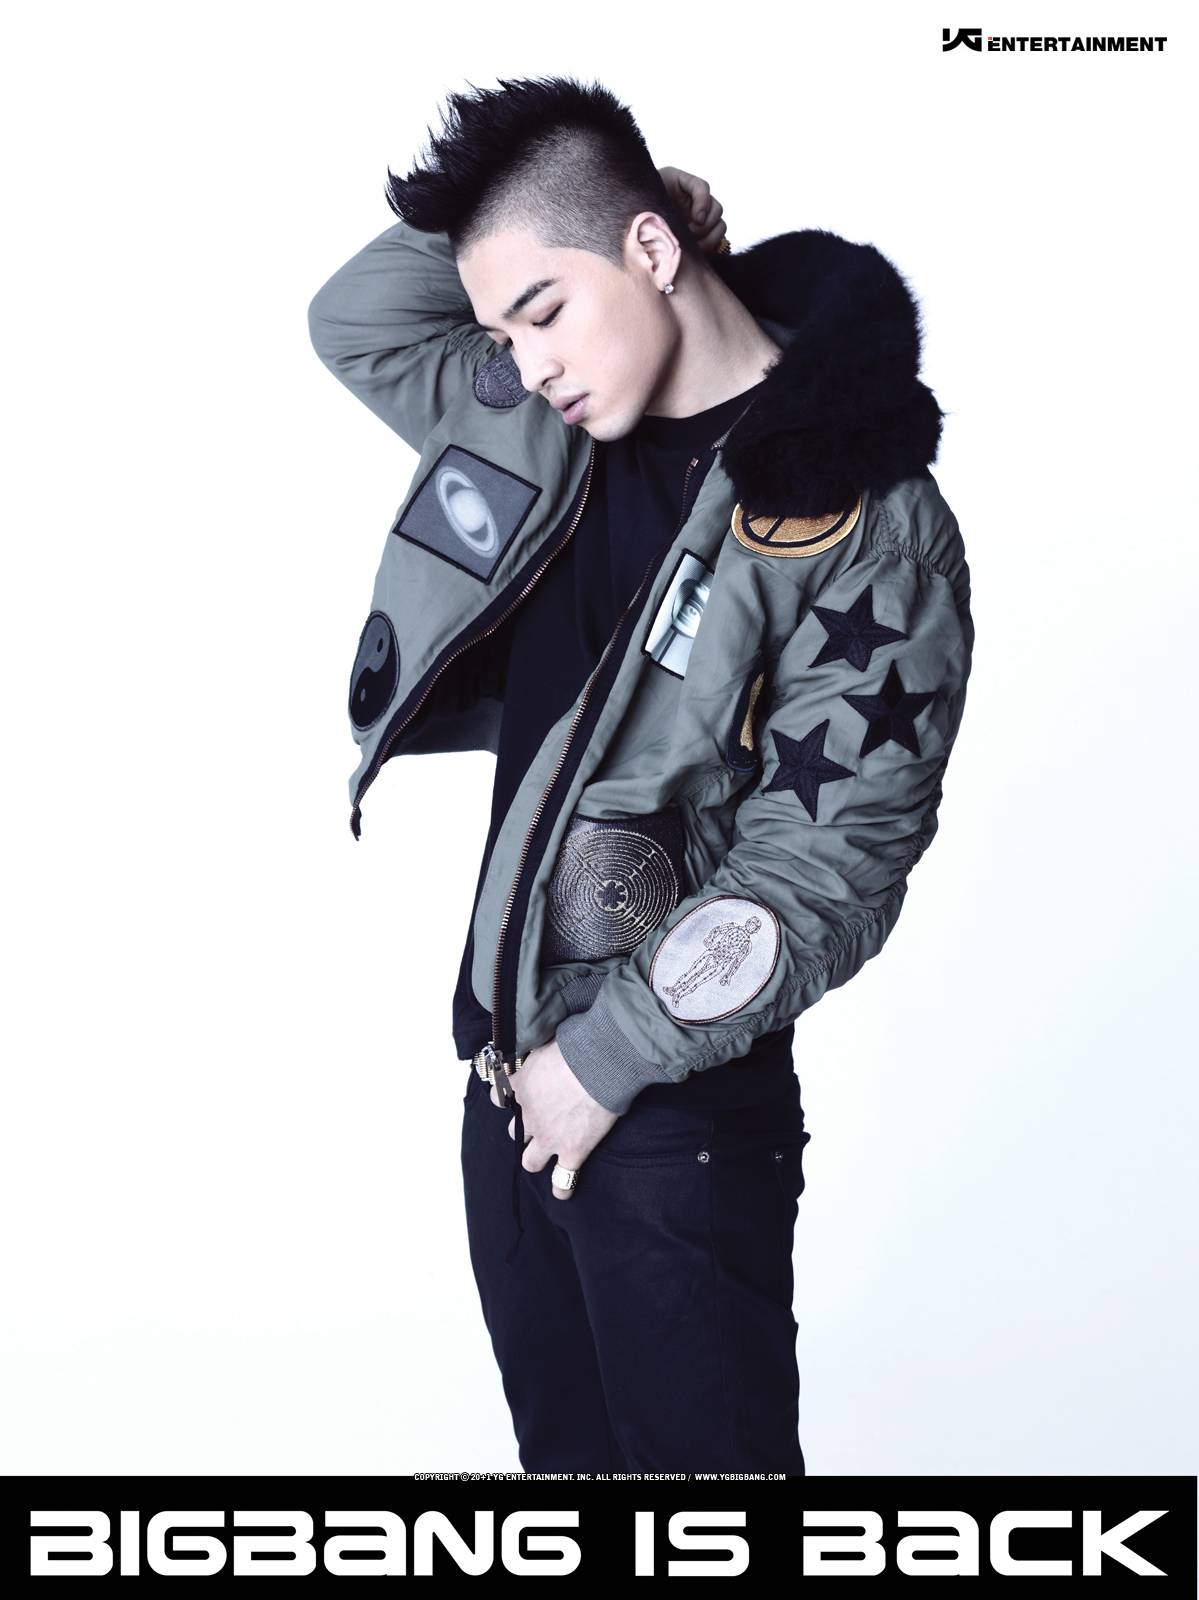 taeyang height image search results